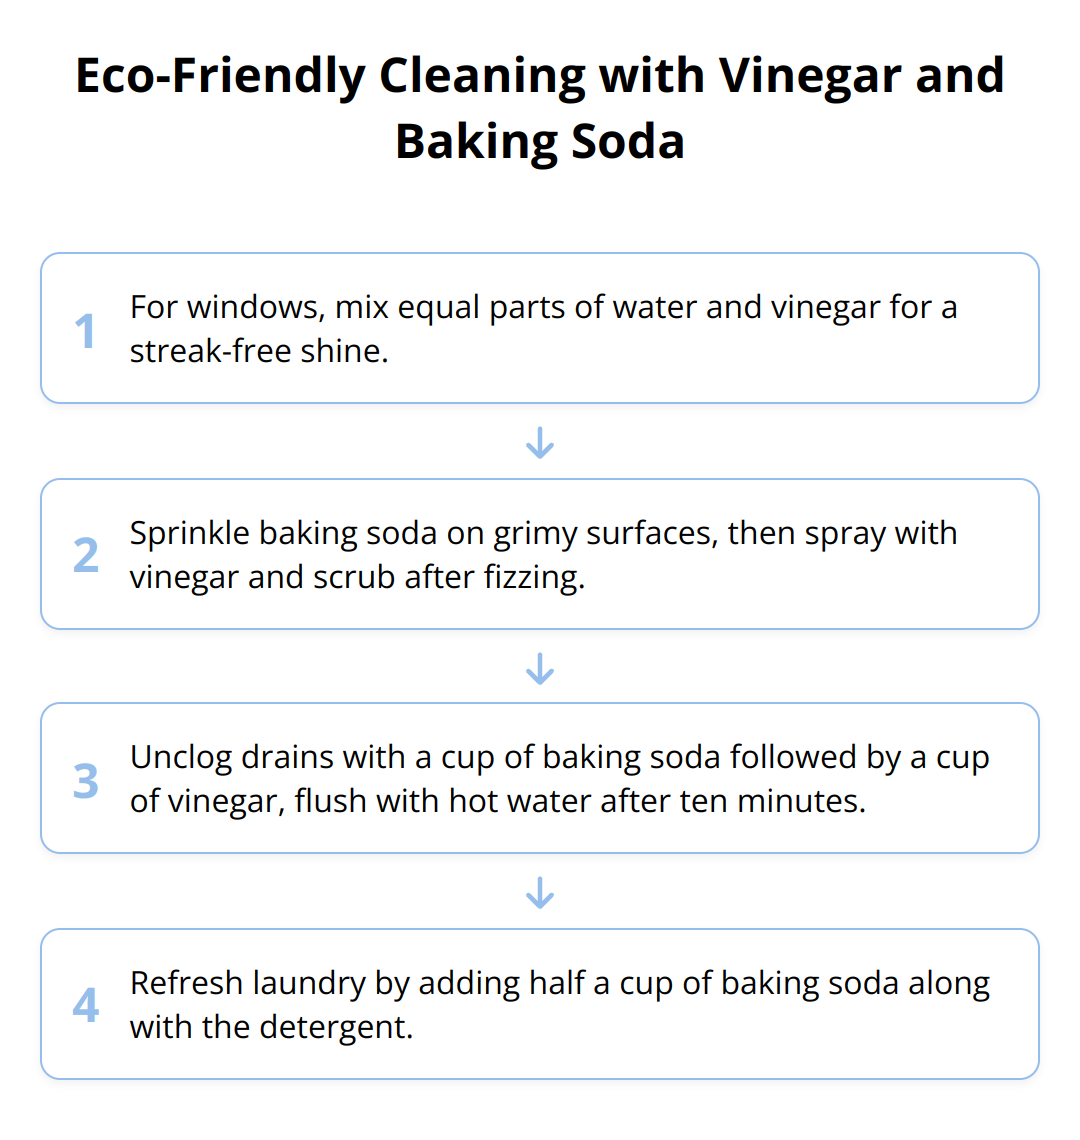 Flow Chart - Eco-Friendly Cleaning with Vinegar and Baking Soda